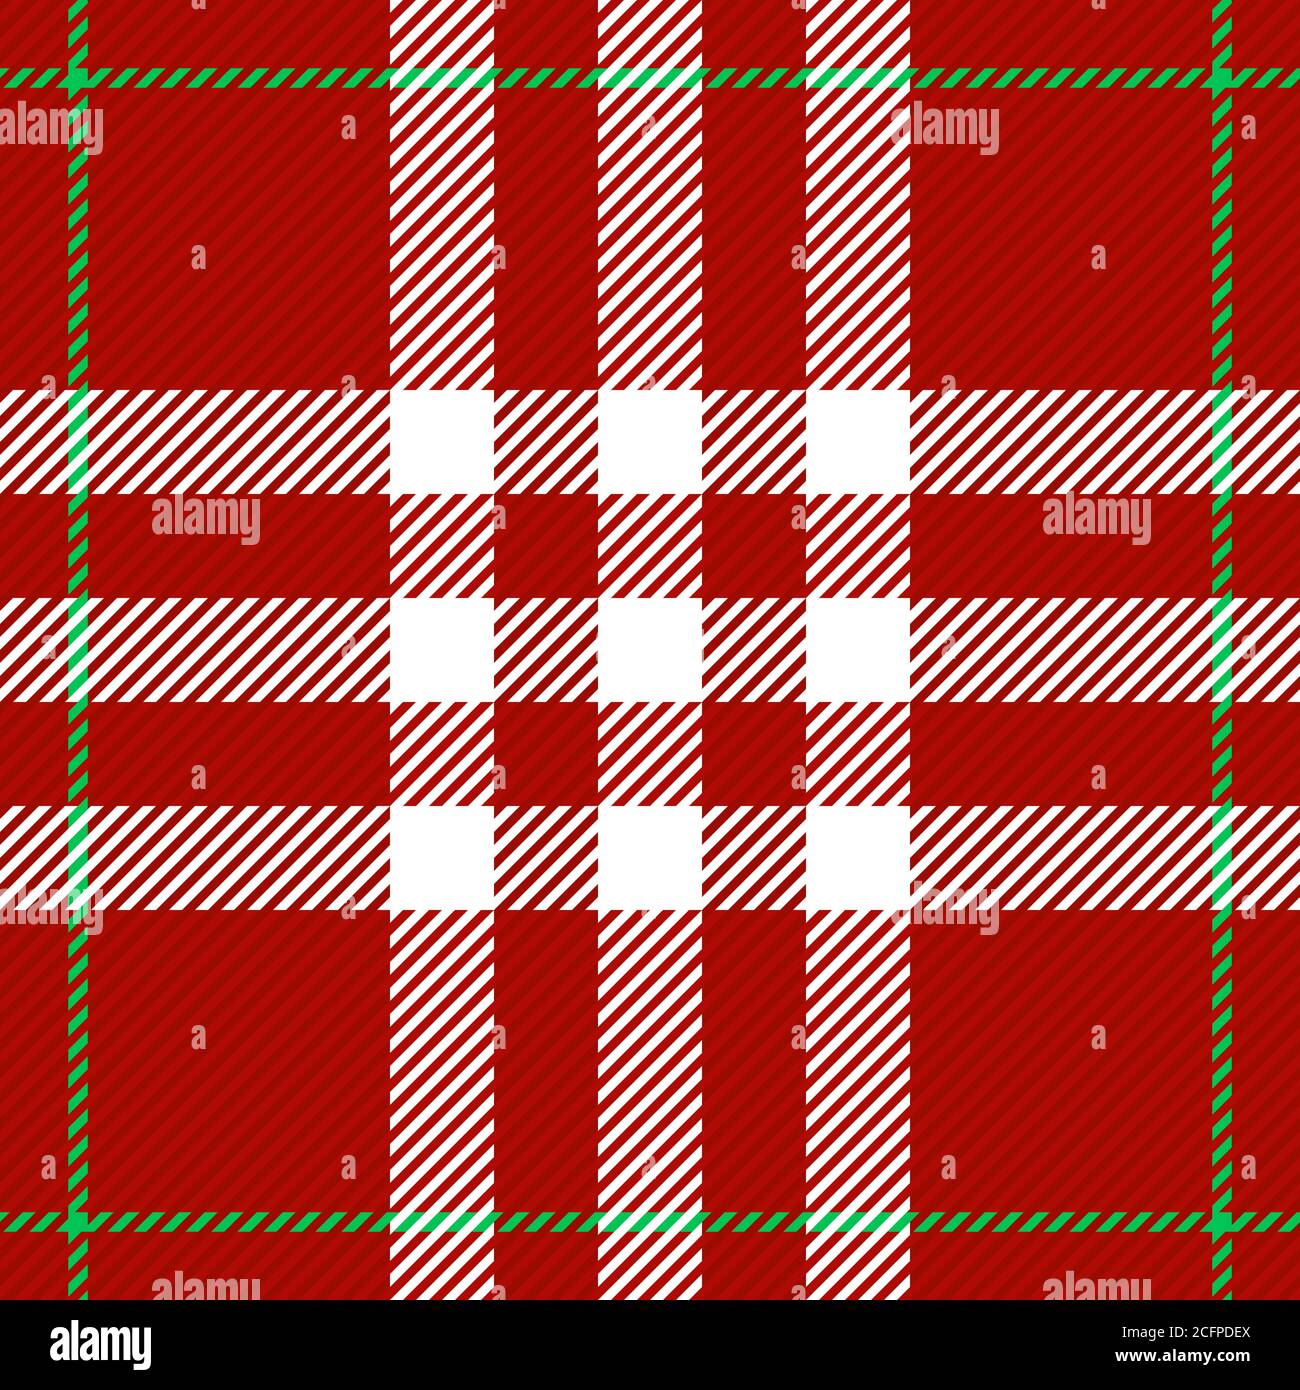 Classic tartan texture seamless pattern. Traditional Scottish checkered plaid ornament. Coloured geometric intersecting striped vector illustration. Stock Vector